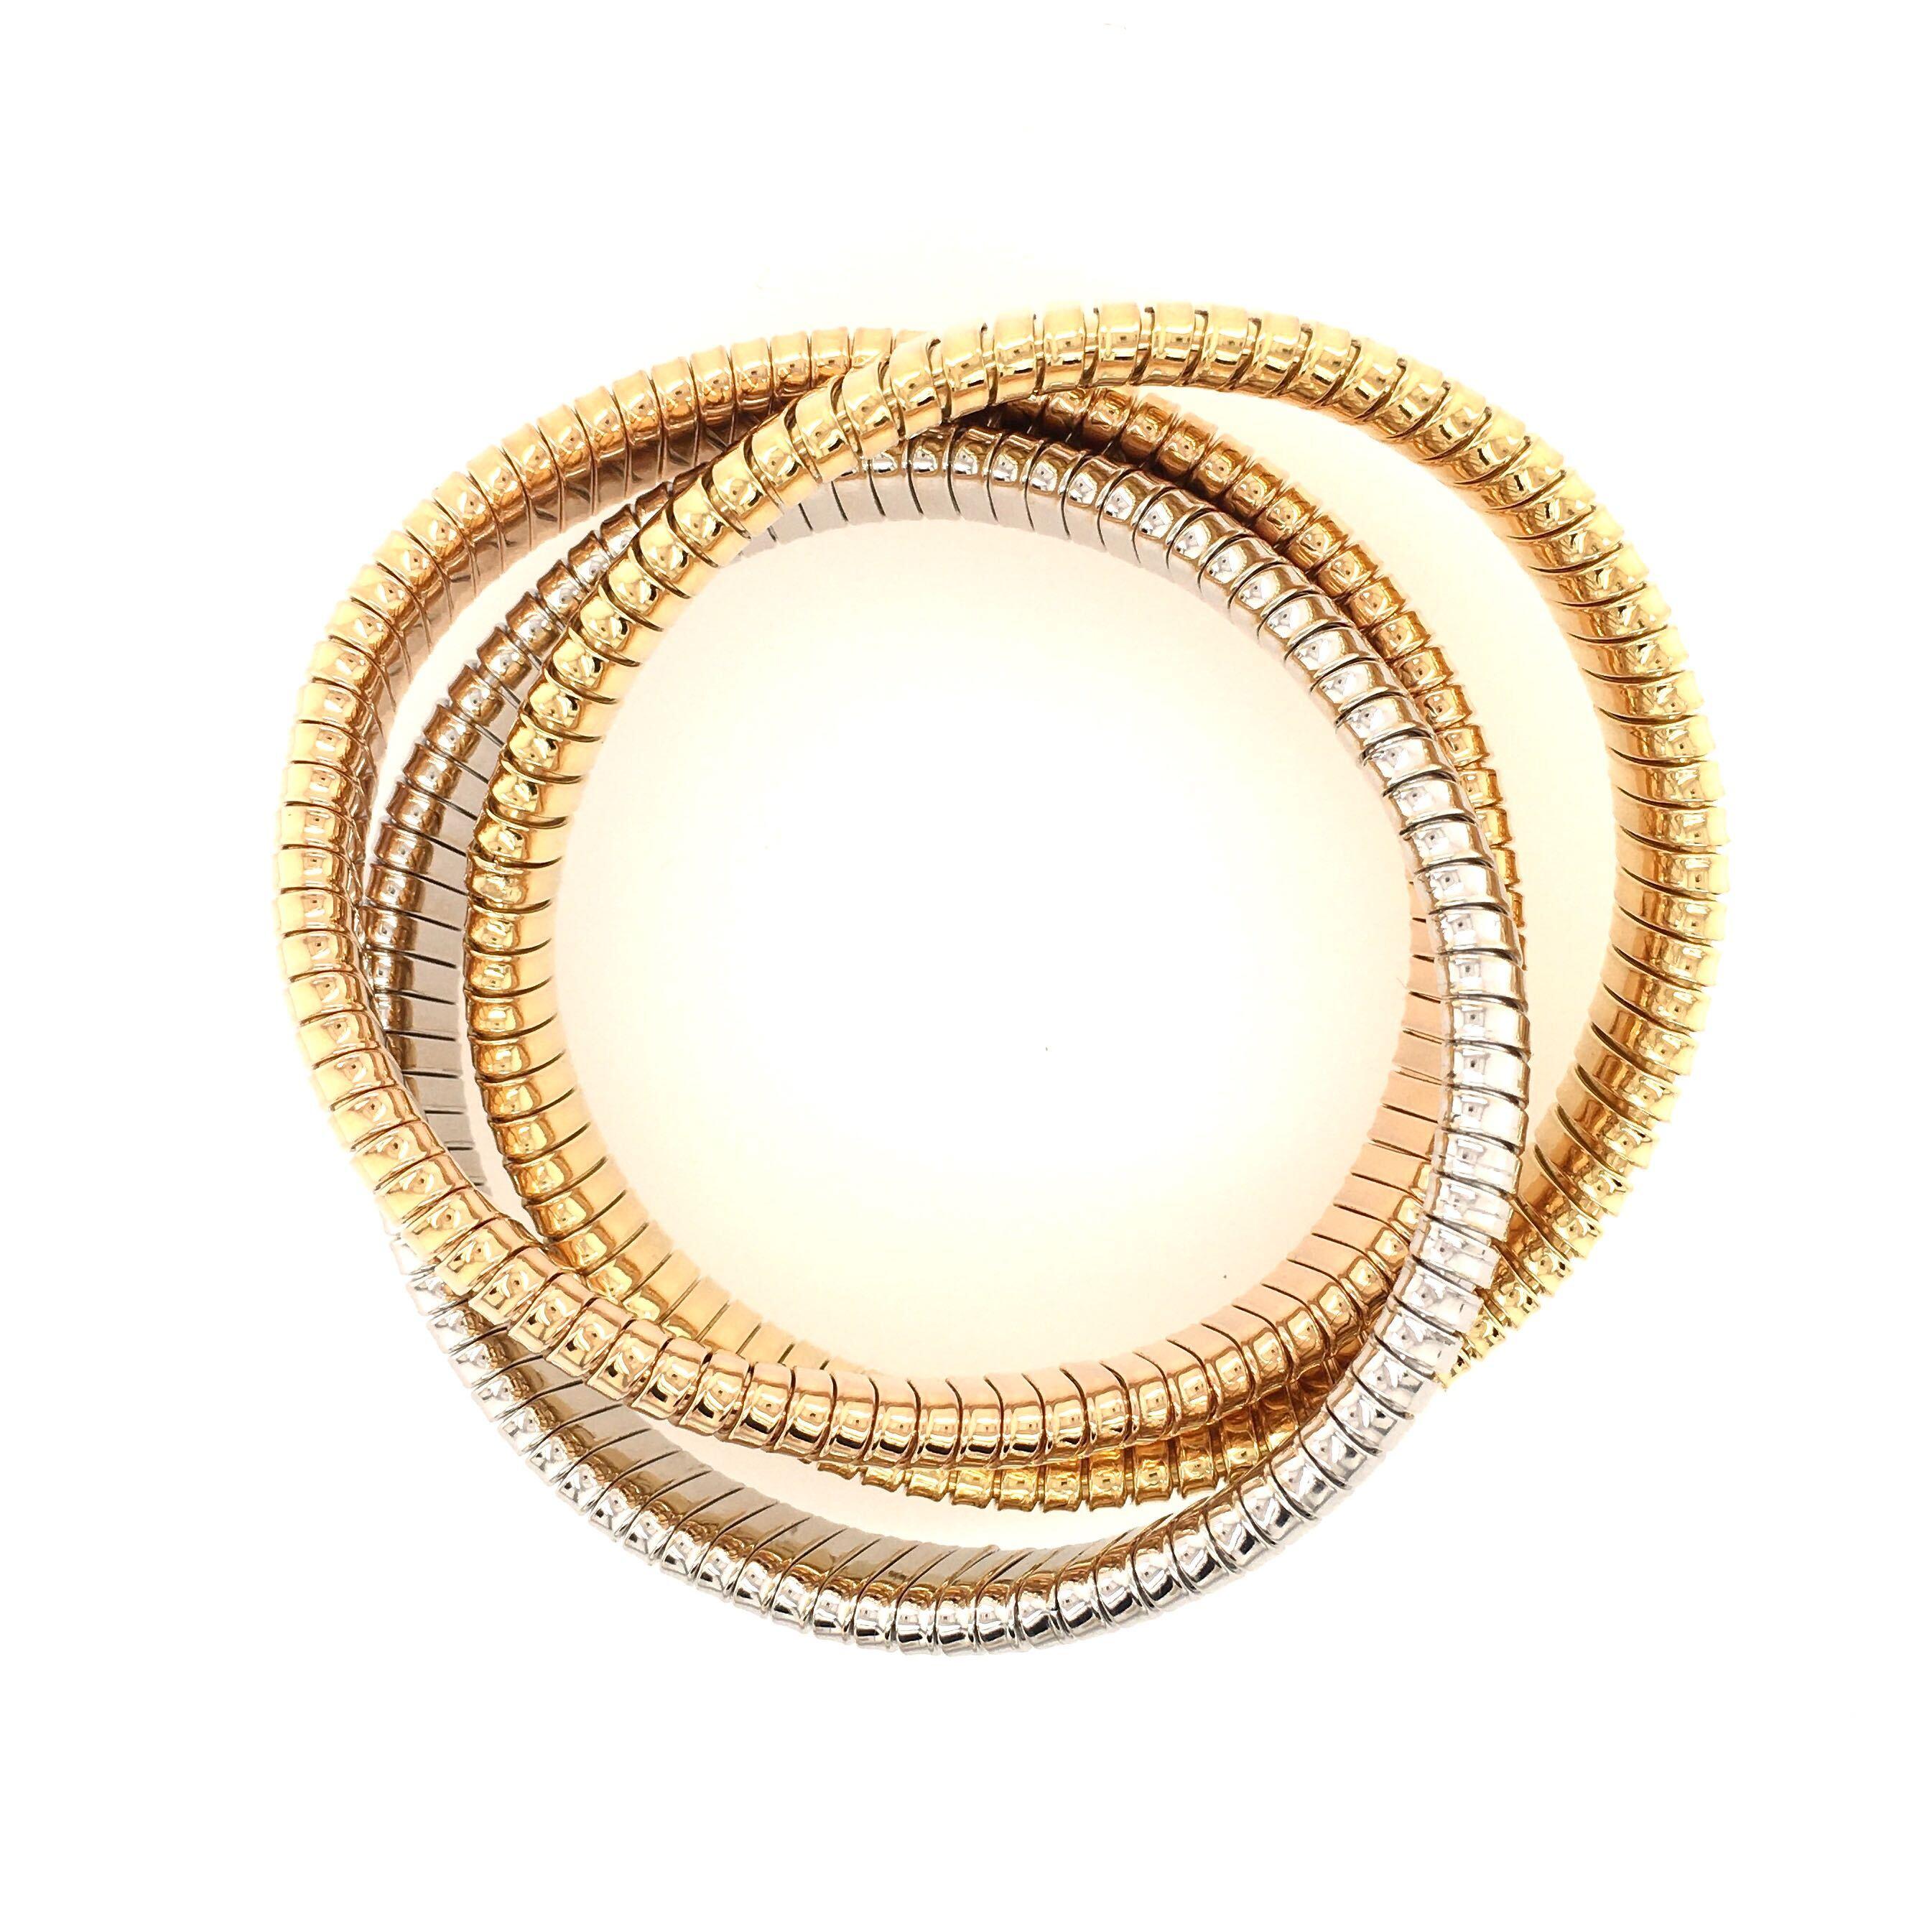 An 18 karat rose, yellow and white gold rolling bracelet. Sidney Garber. Deigned as slightly flexible intertwining rose, yellow and white gold gas pipe bangles, Width of each bracelet is approximately 1/2 inch, inside measurement is approximately 7